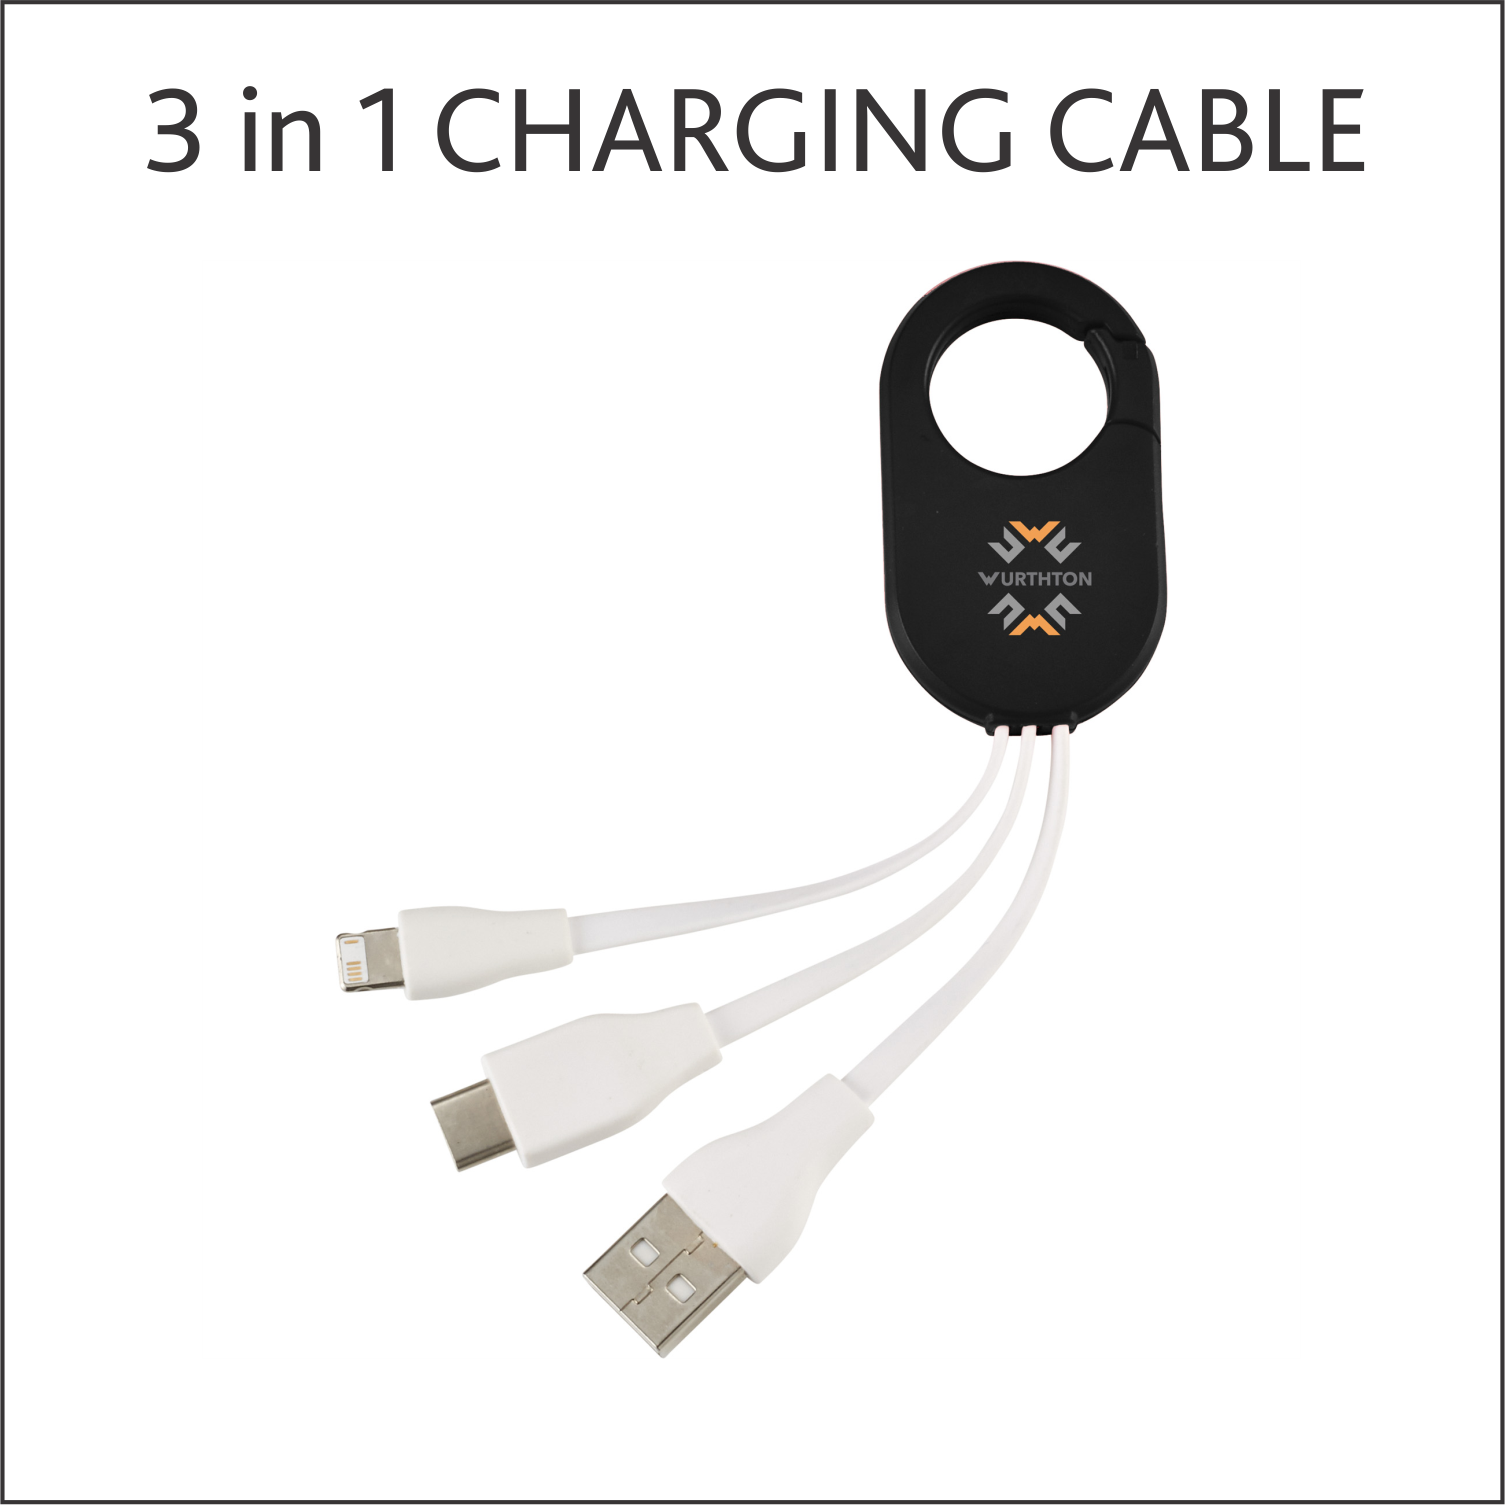 CHARGING CABLE.png